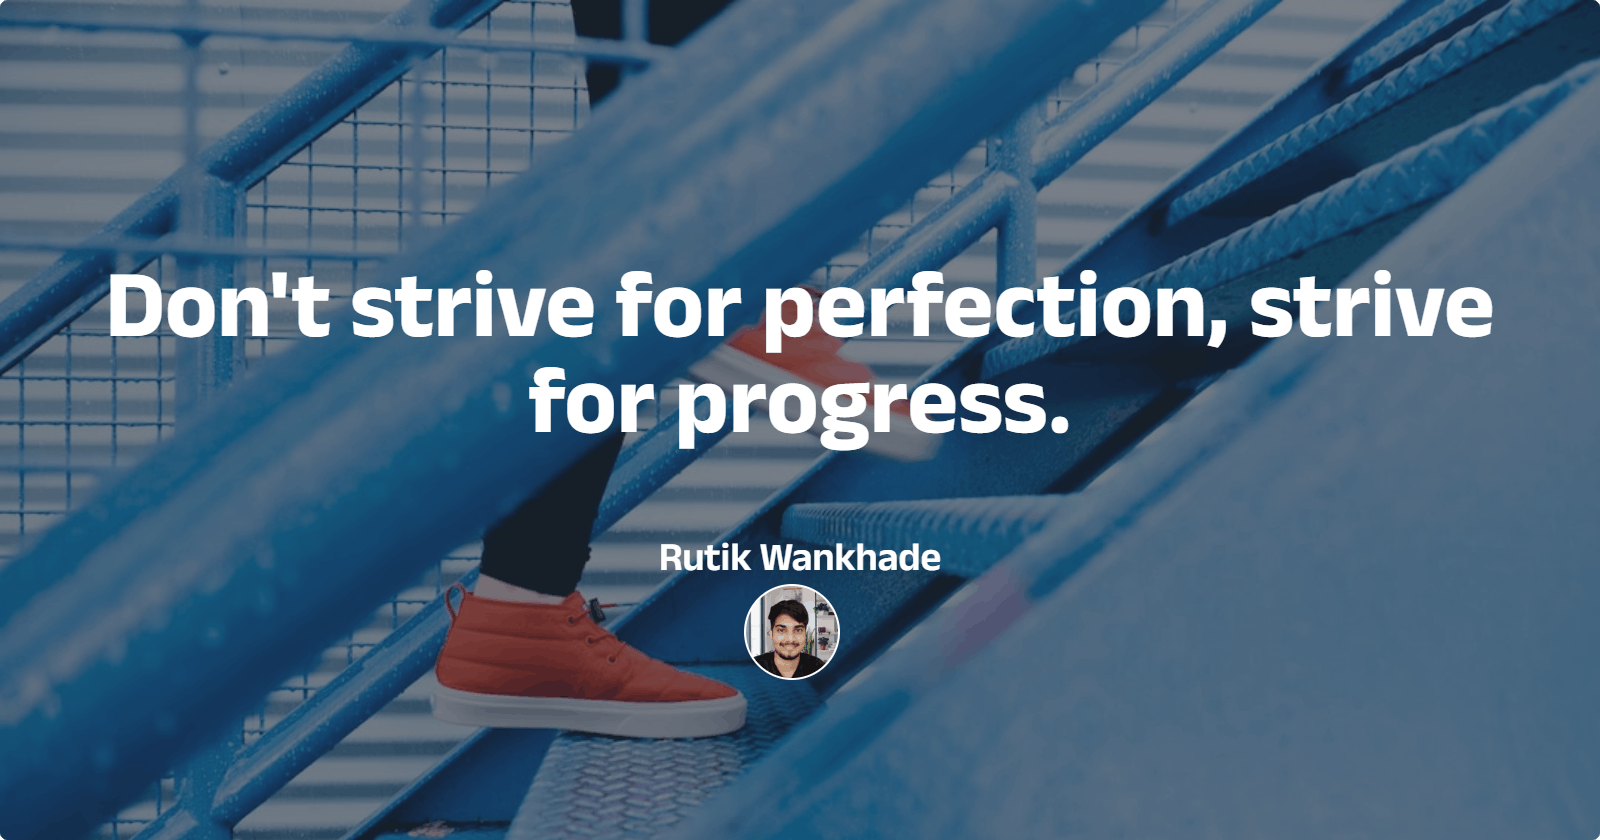 Don't strive for perfection, strive for progress.